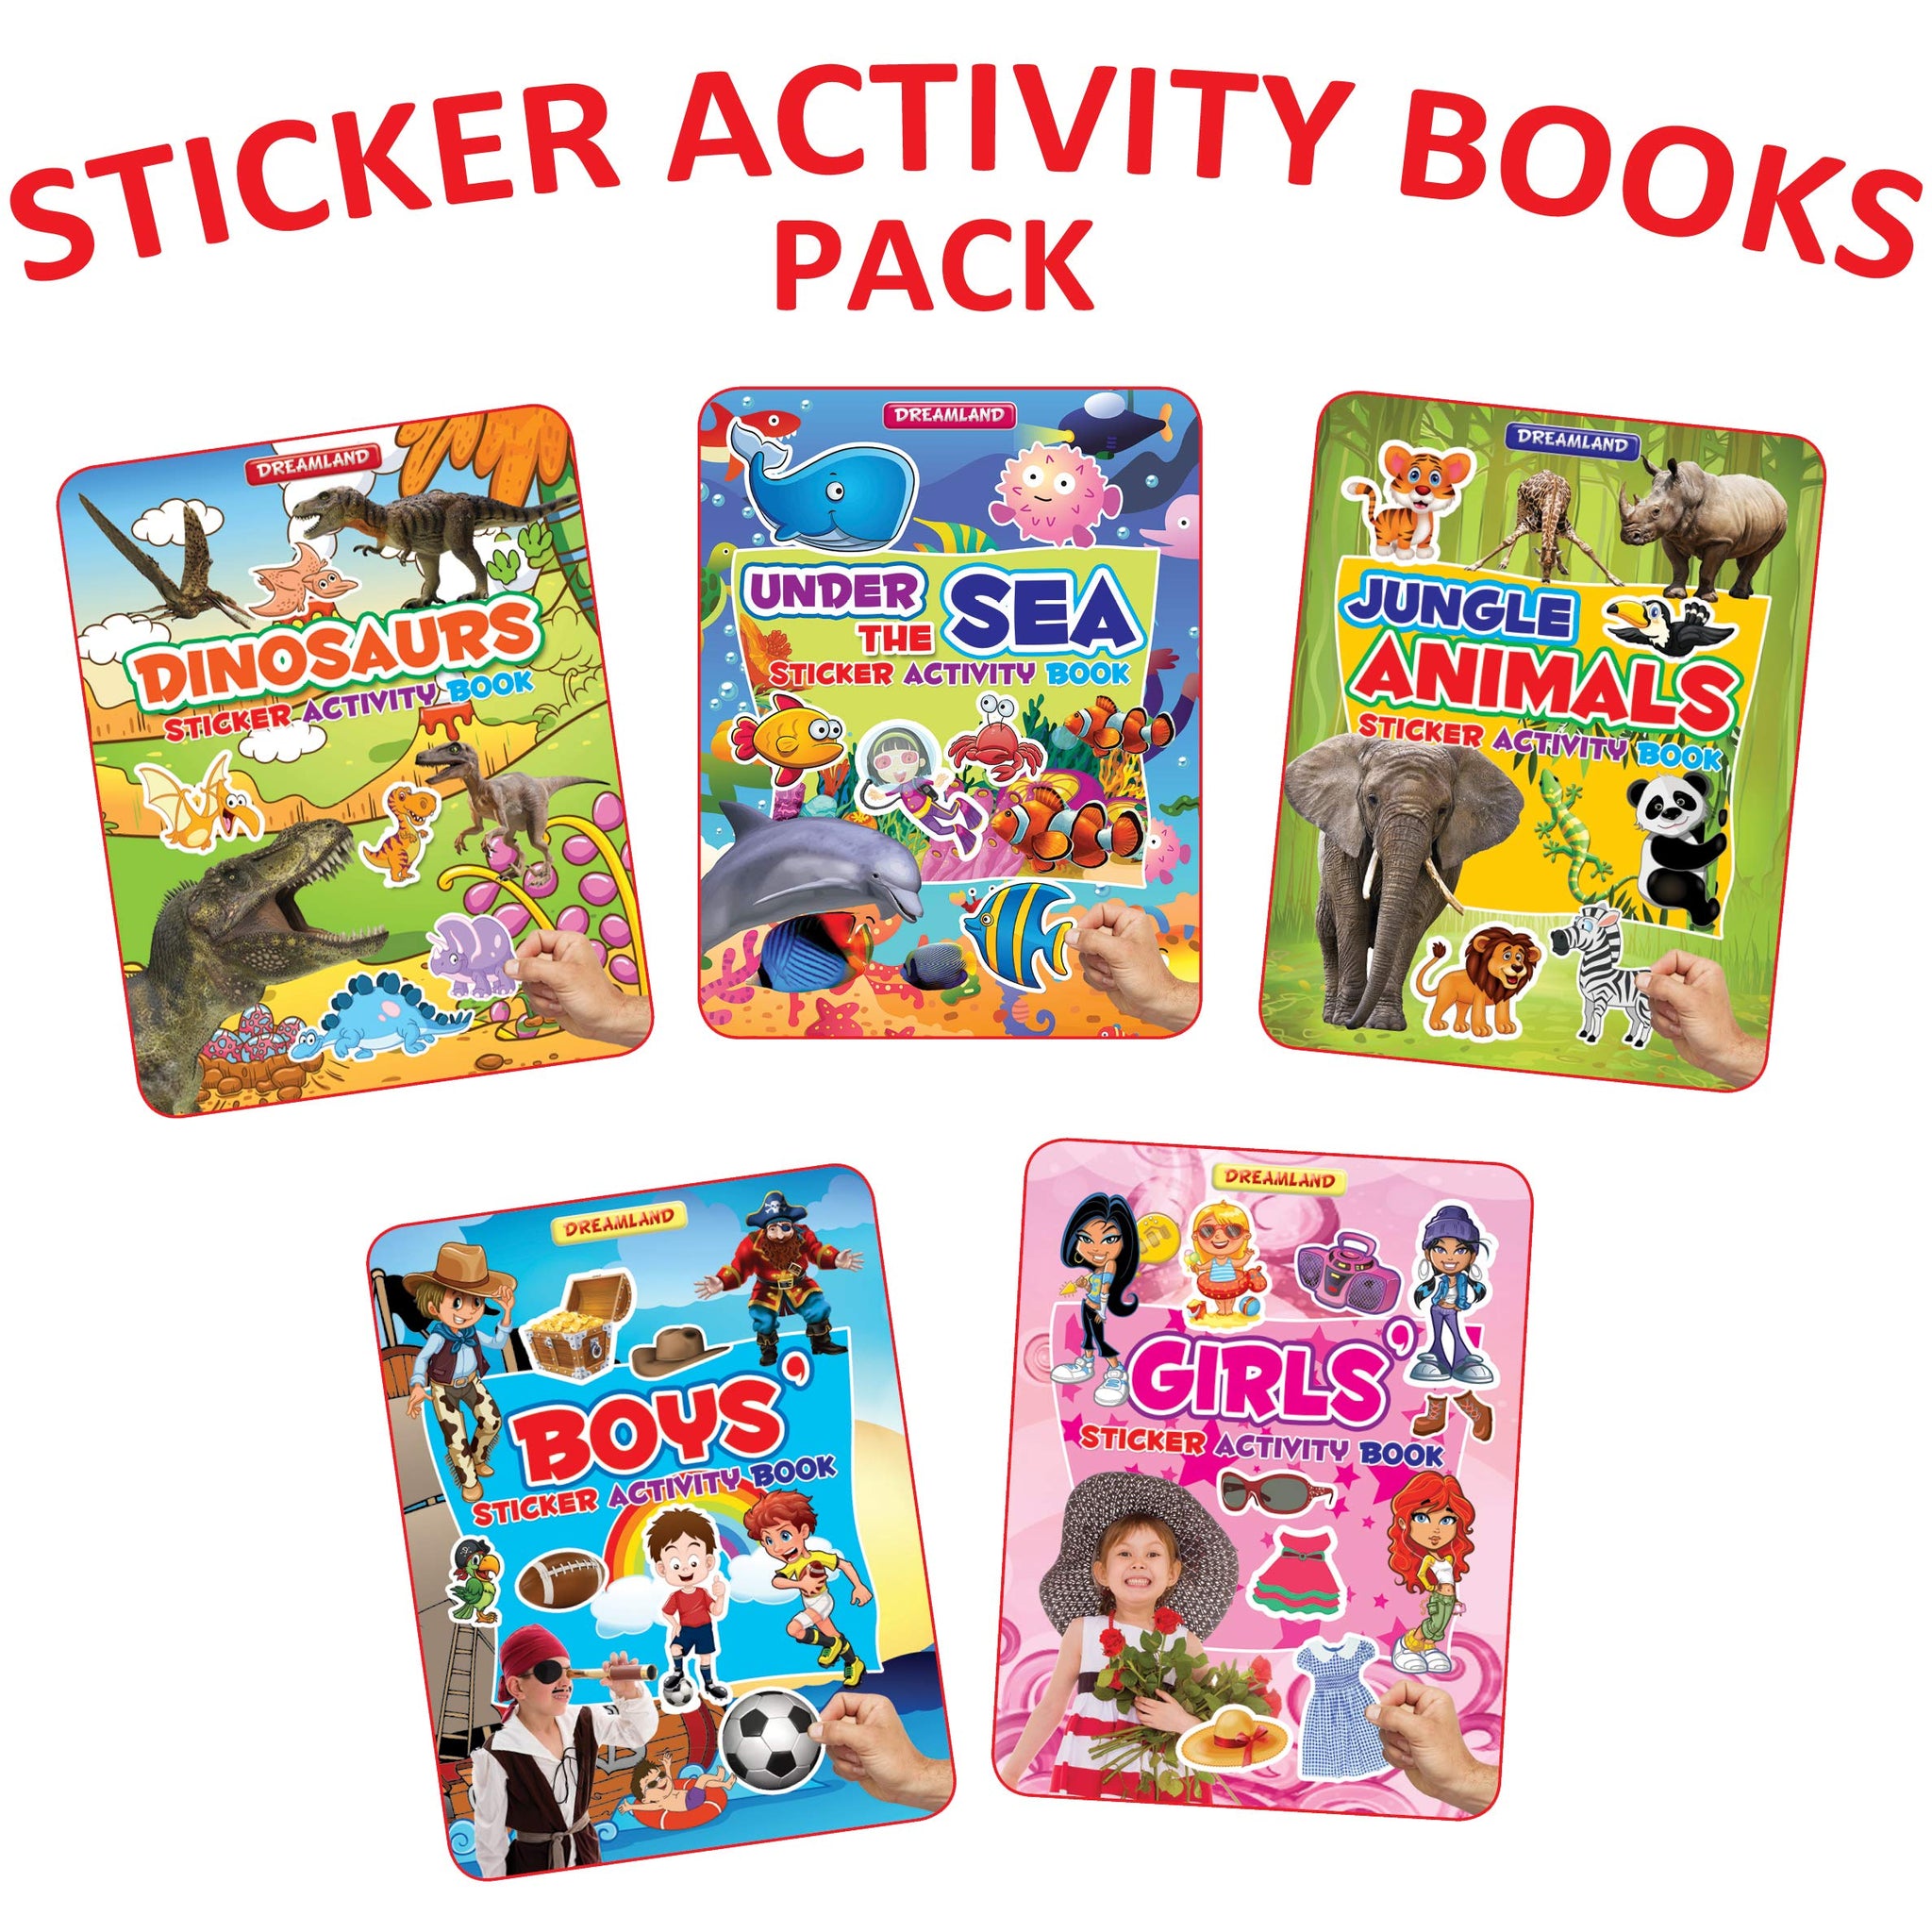 Scatterlings of Africa III: Wild Animal Craft Stickers for